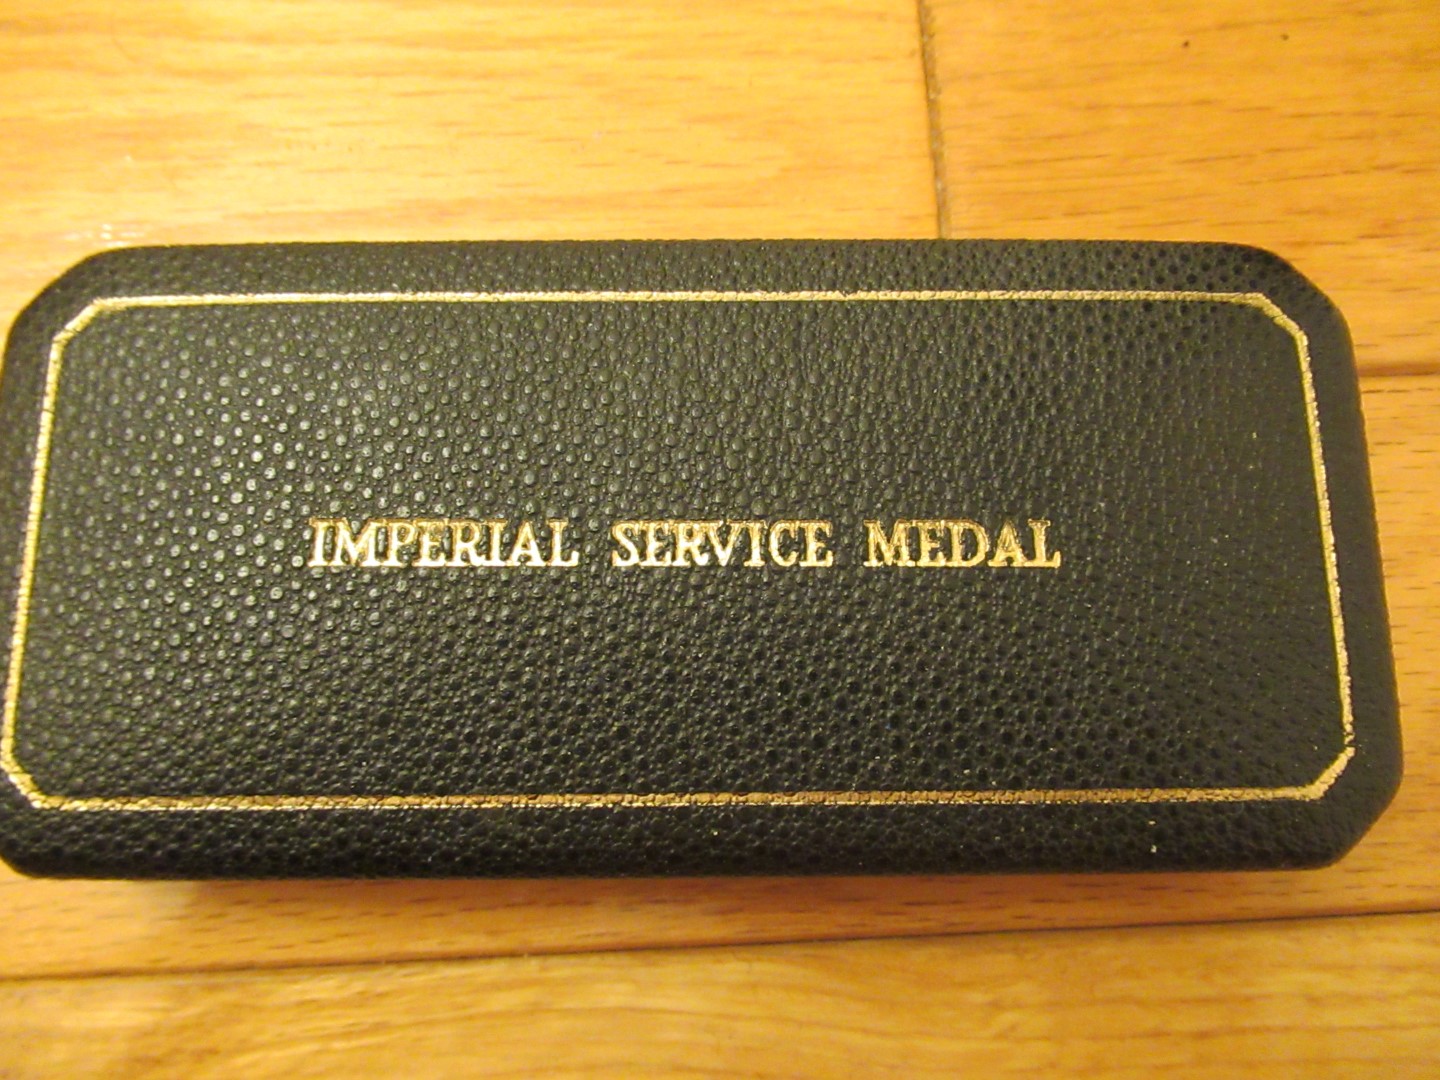 Imperial service medal boxed